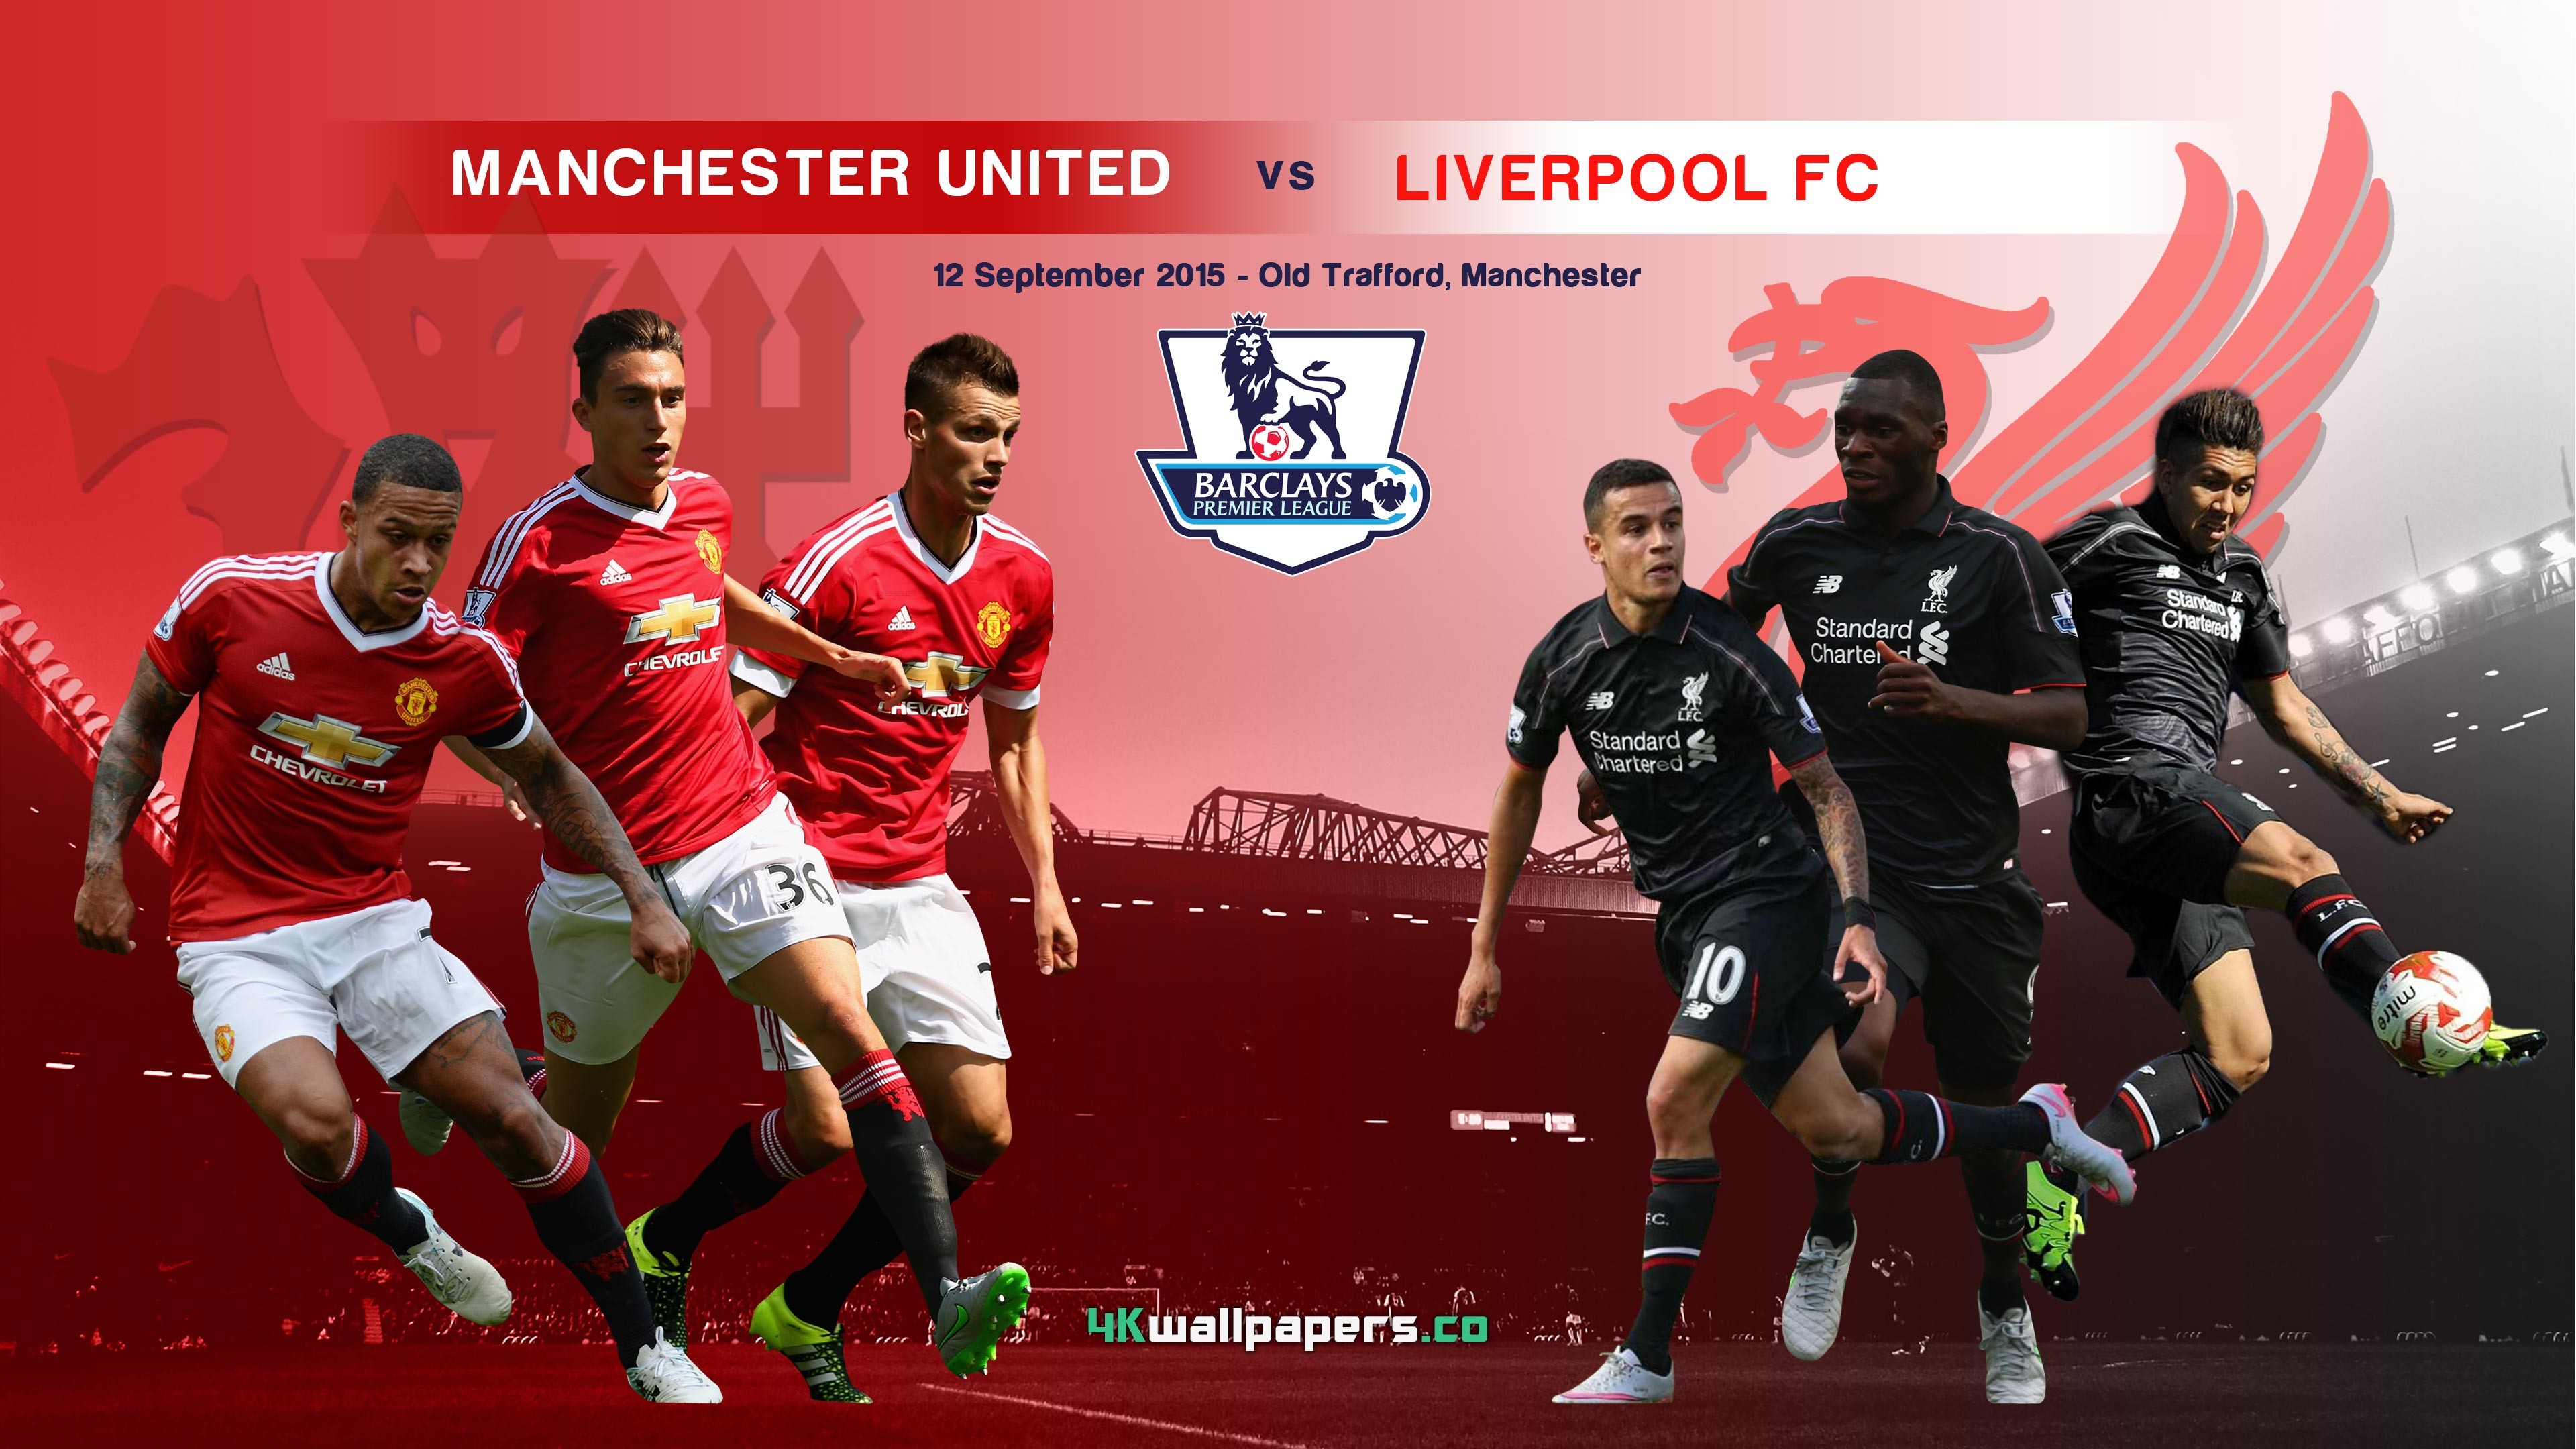 3840x2160 Manchester United Vs Liverpool The Best Football Hd Widescreen Wallpaper  2017 For Smartphone